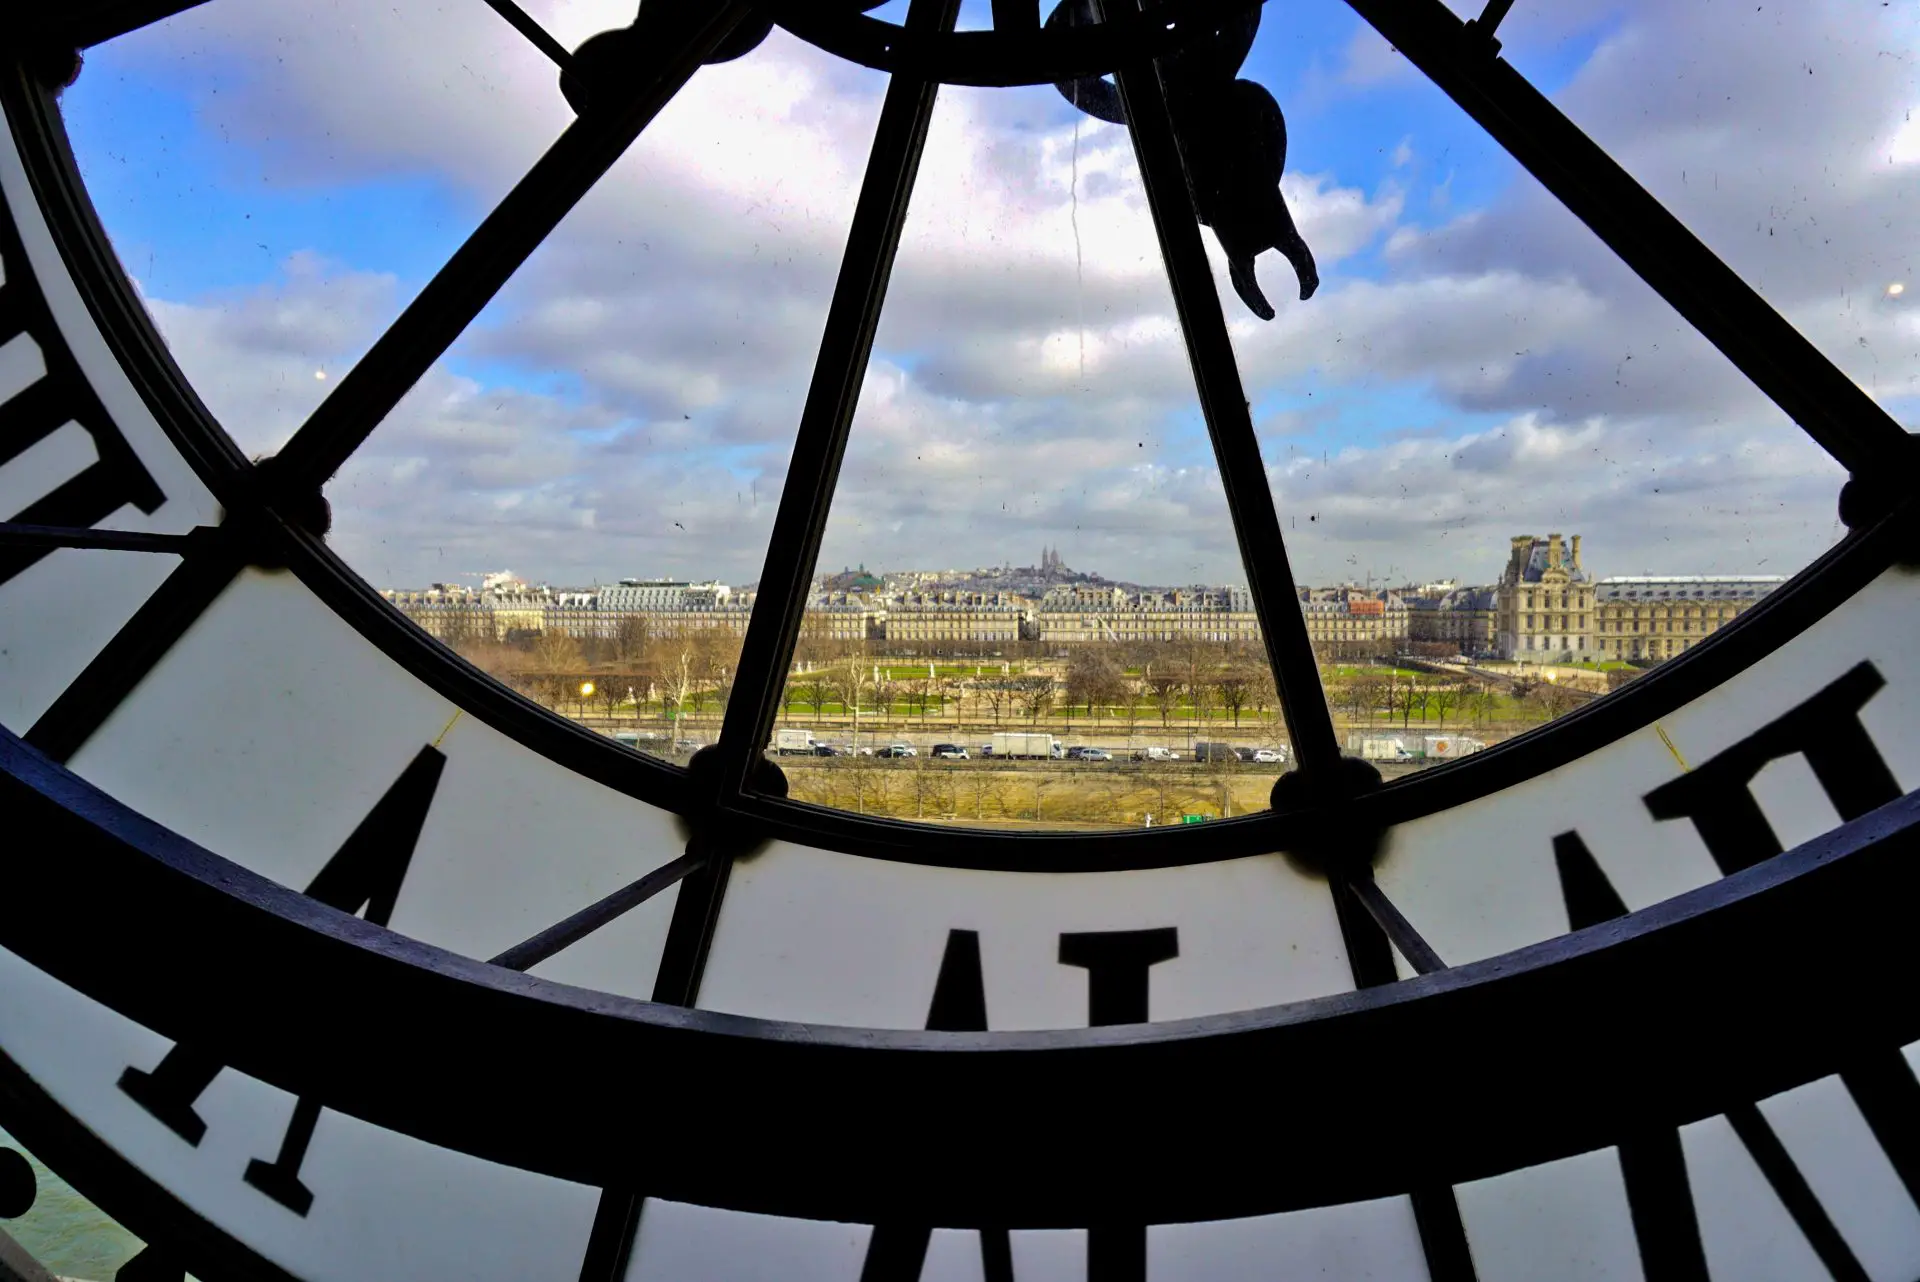 Musee d'Orsay, Paris, France - Experiencing the Globe